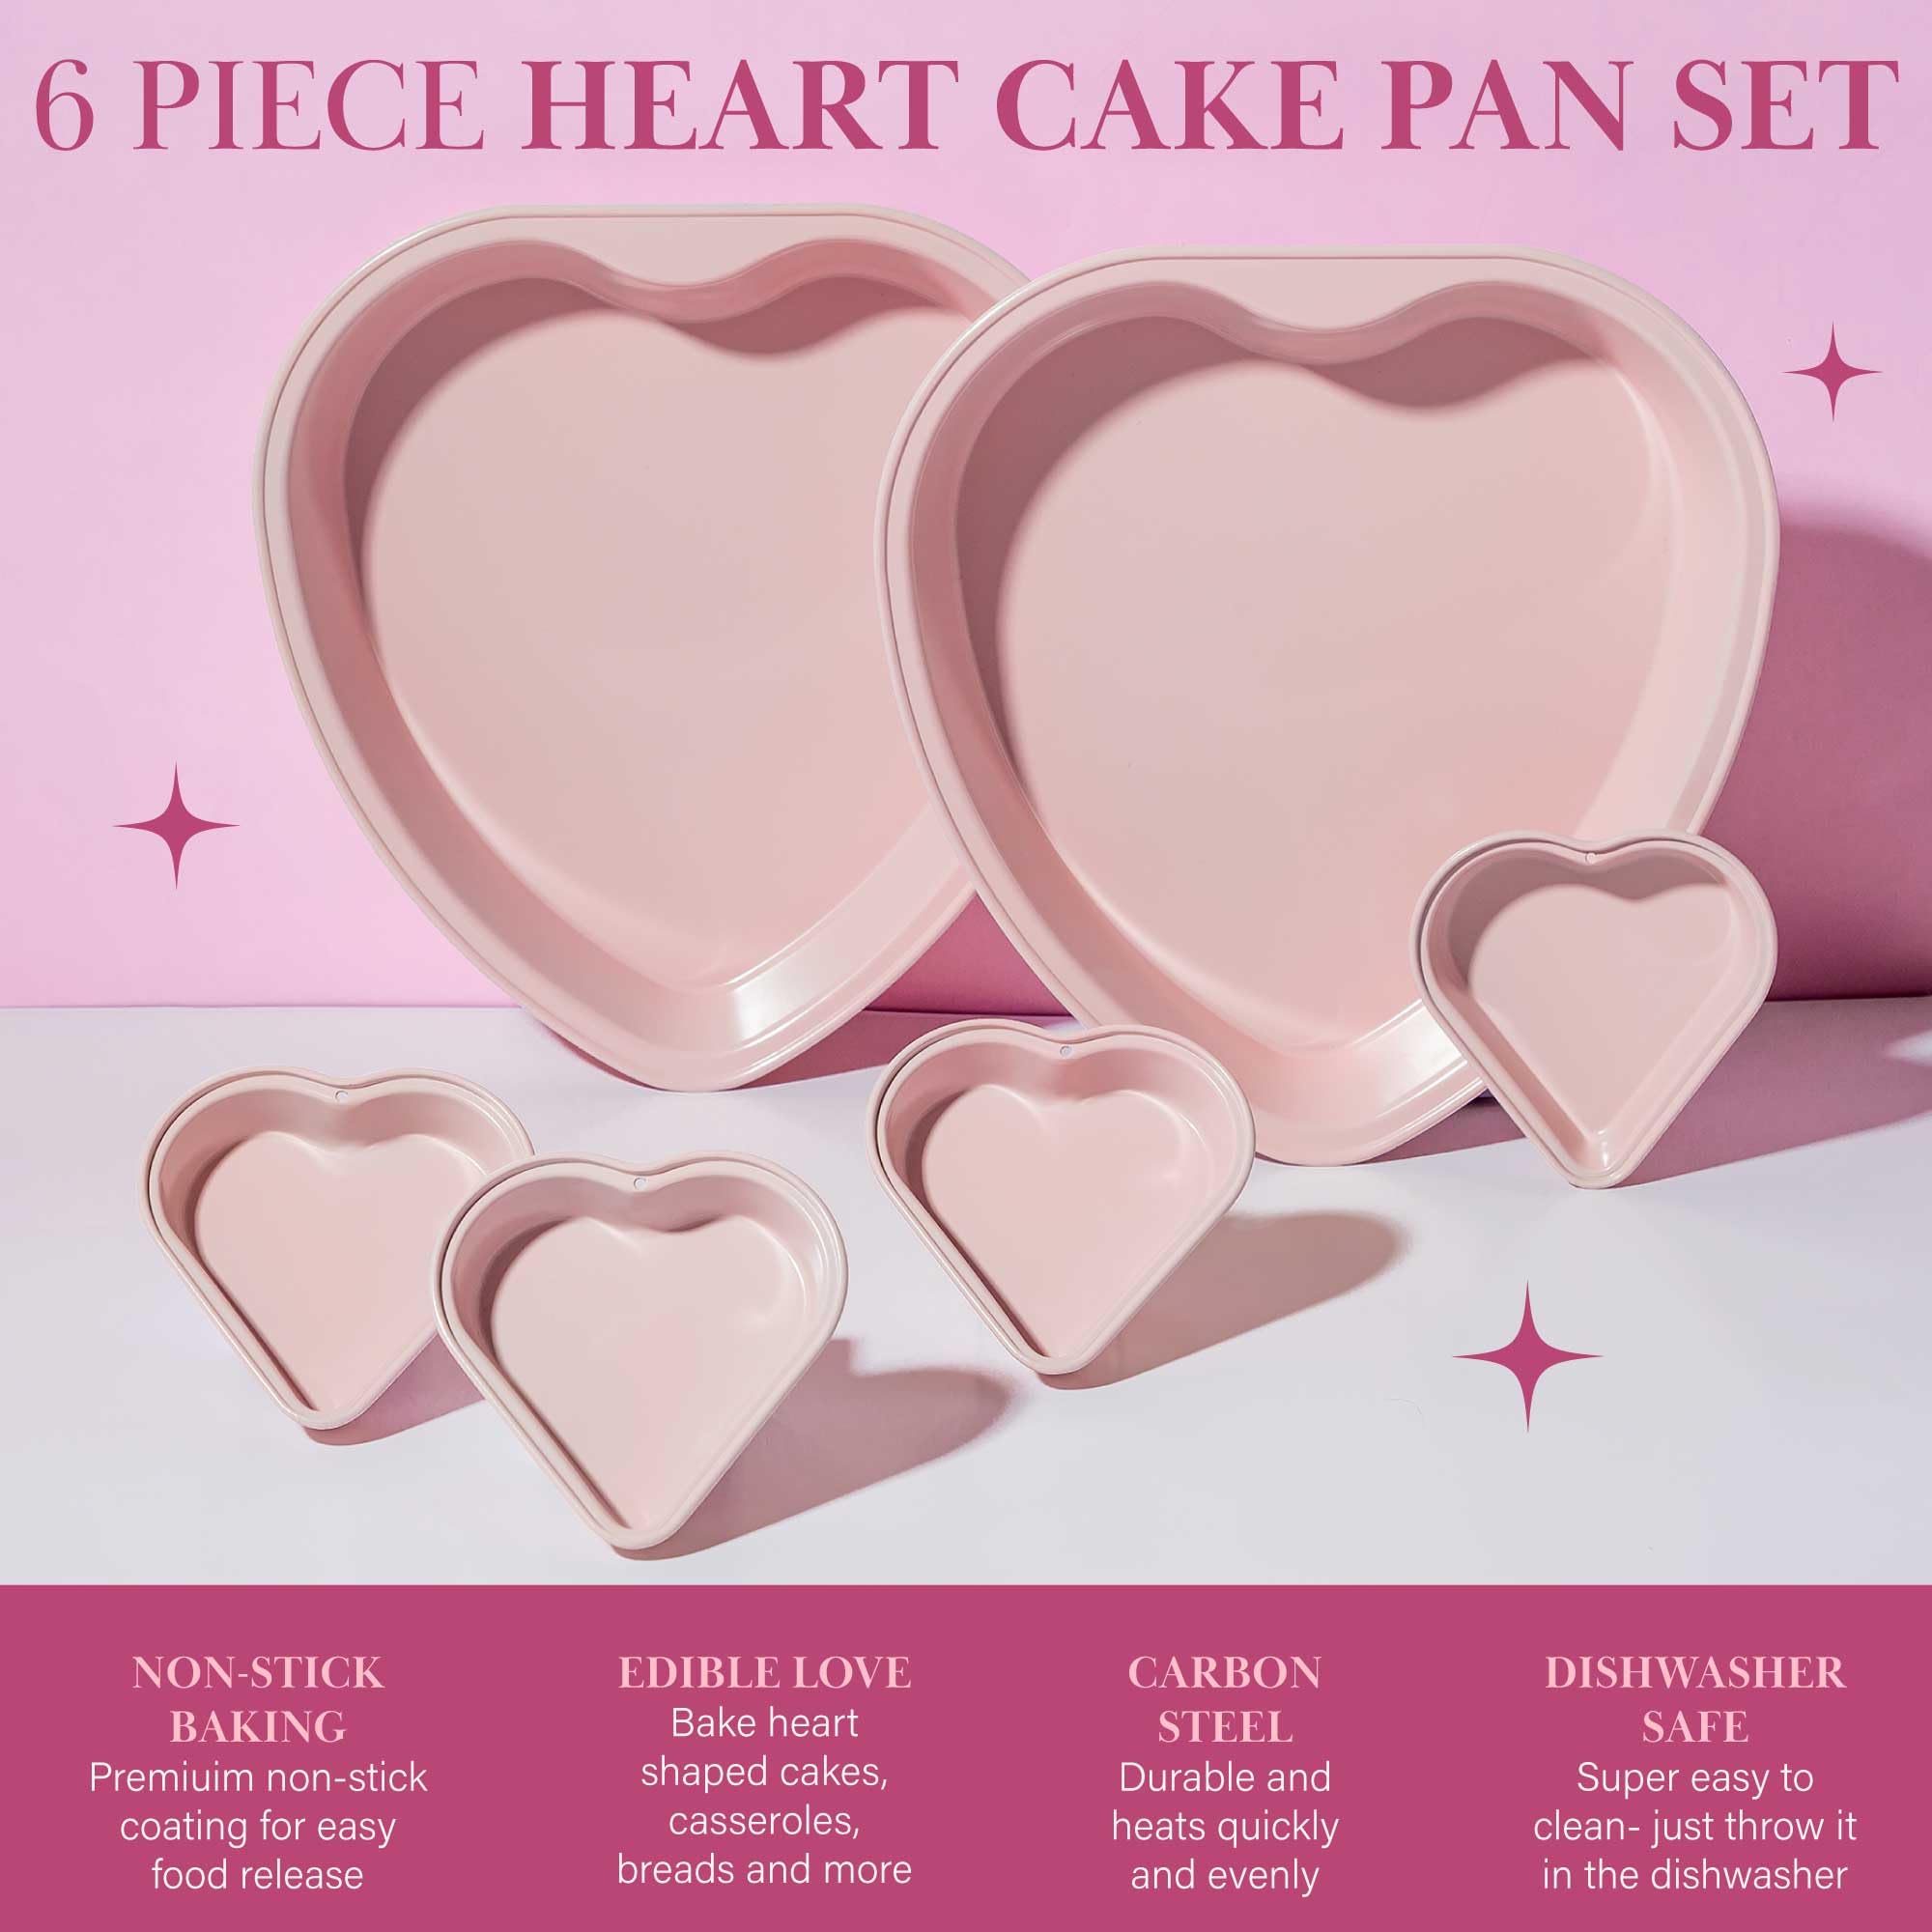 Paris Hilton Heart Shaped Nonstick Bakeware Set, Easy Release Carbon Steel, Includes two 9.5-Inch Pans and four Mini 3.5-Inch Pans, Dishwasher Safe, Made without PFAS or PFOA, 6-Piece Set, Pink